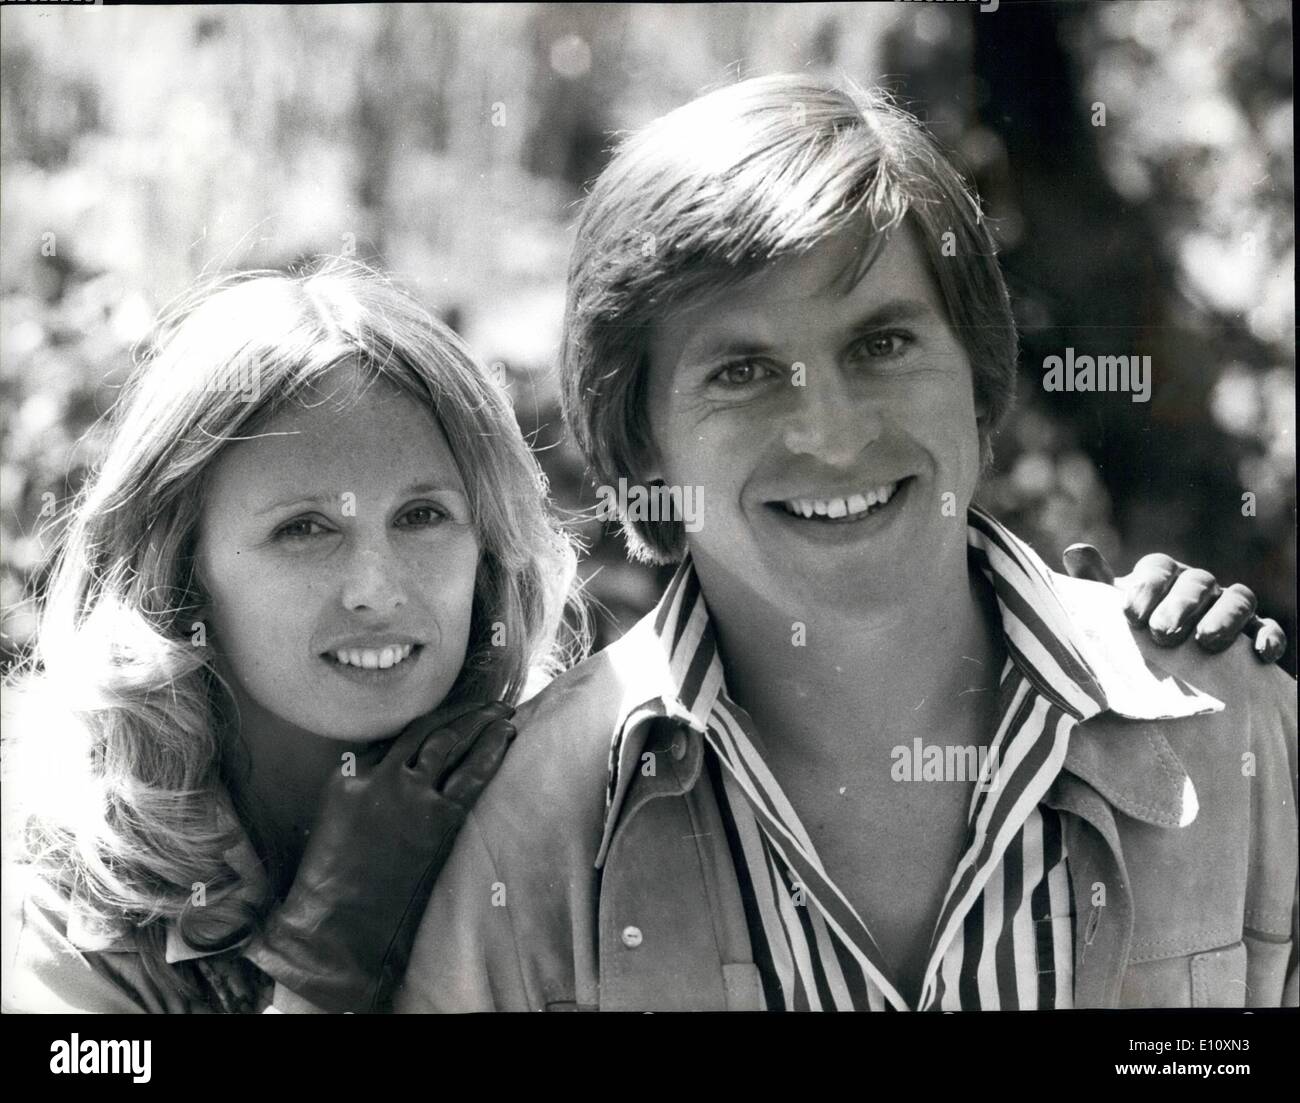 Aug. 08, 1974 - Shooting begins on the new film ''Alfie Darling'' Alan Price plays the title role: Alfie Elkins, the screen's most famous rought and ready Romeo, made his welcome return to motion pictures when shooting began today on the new film ''Alfie Darling'', a Signal Film production. Playing the title-role is Alan Price, the Pop singer and composer. Alec making her motion picture starring debut as Abby in the film is Alan's co-star, American born actress, Jill Townsend, who in private life is married to British actor Nicol Williamson Stock Photo